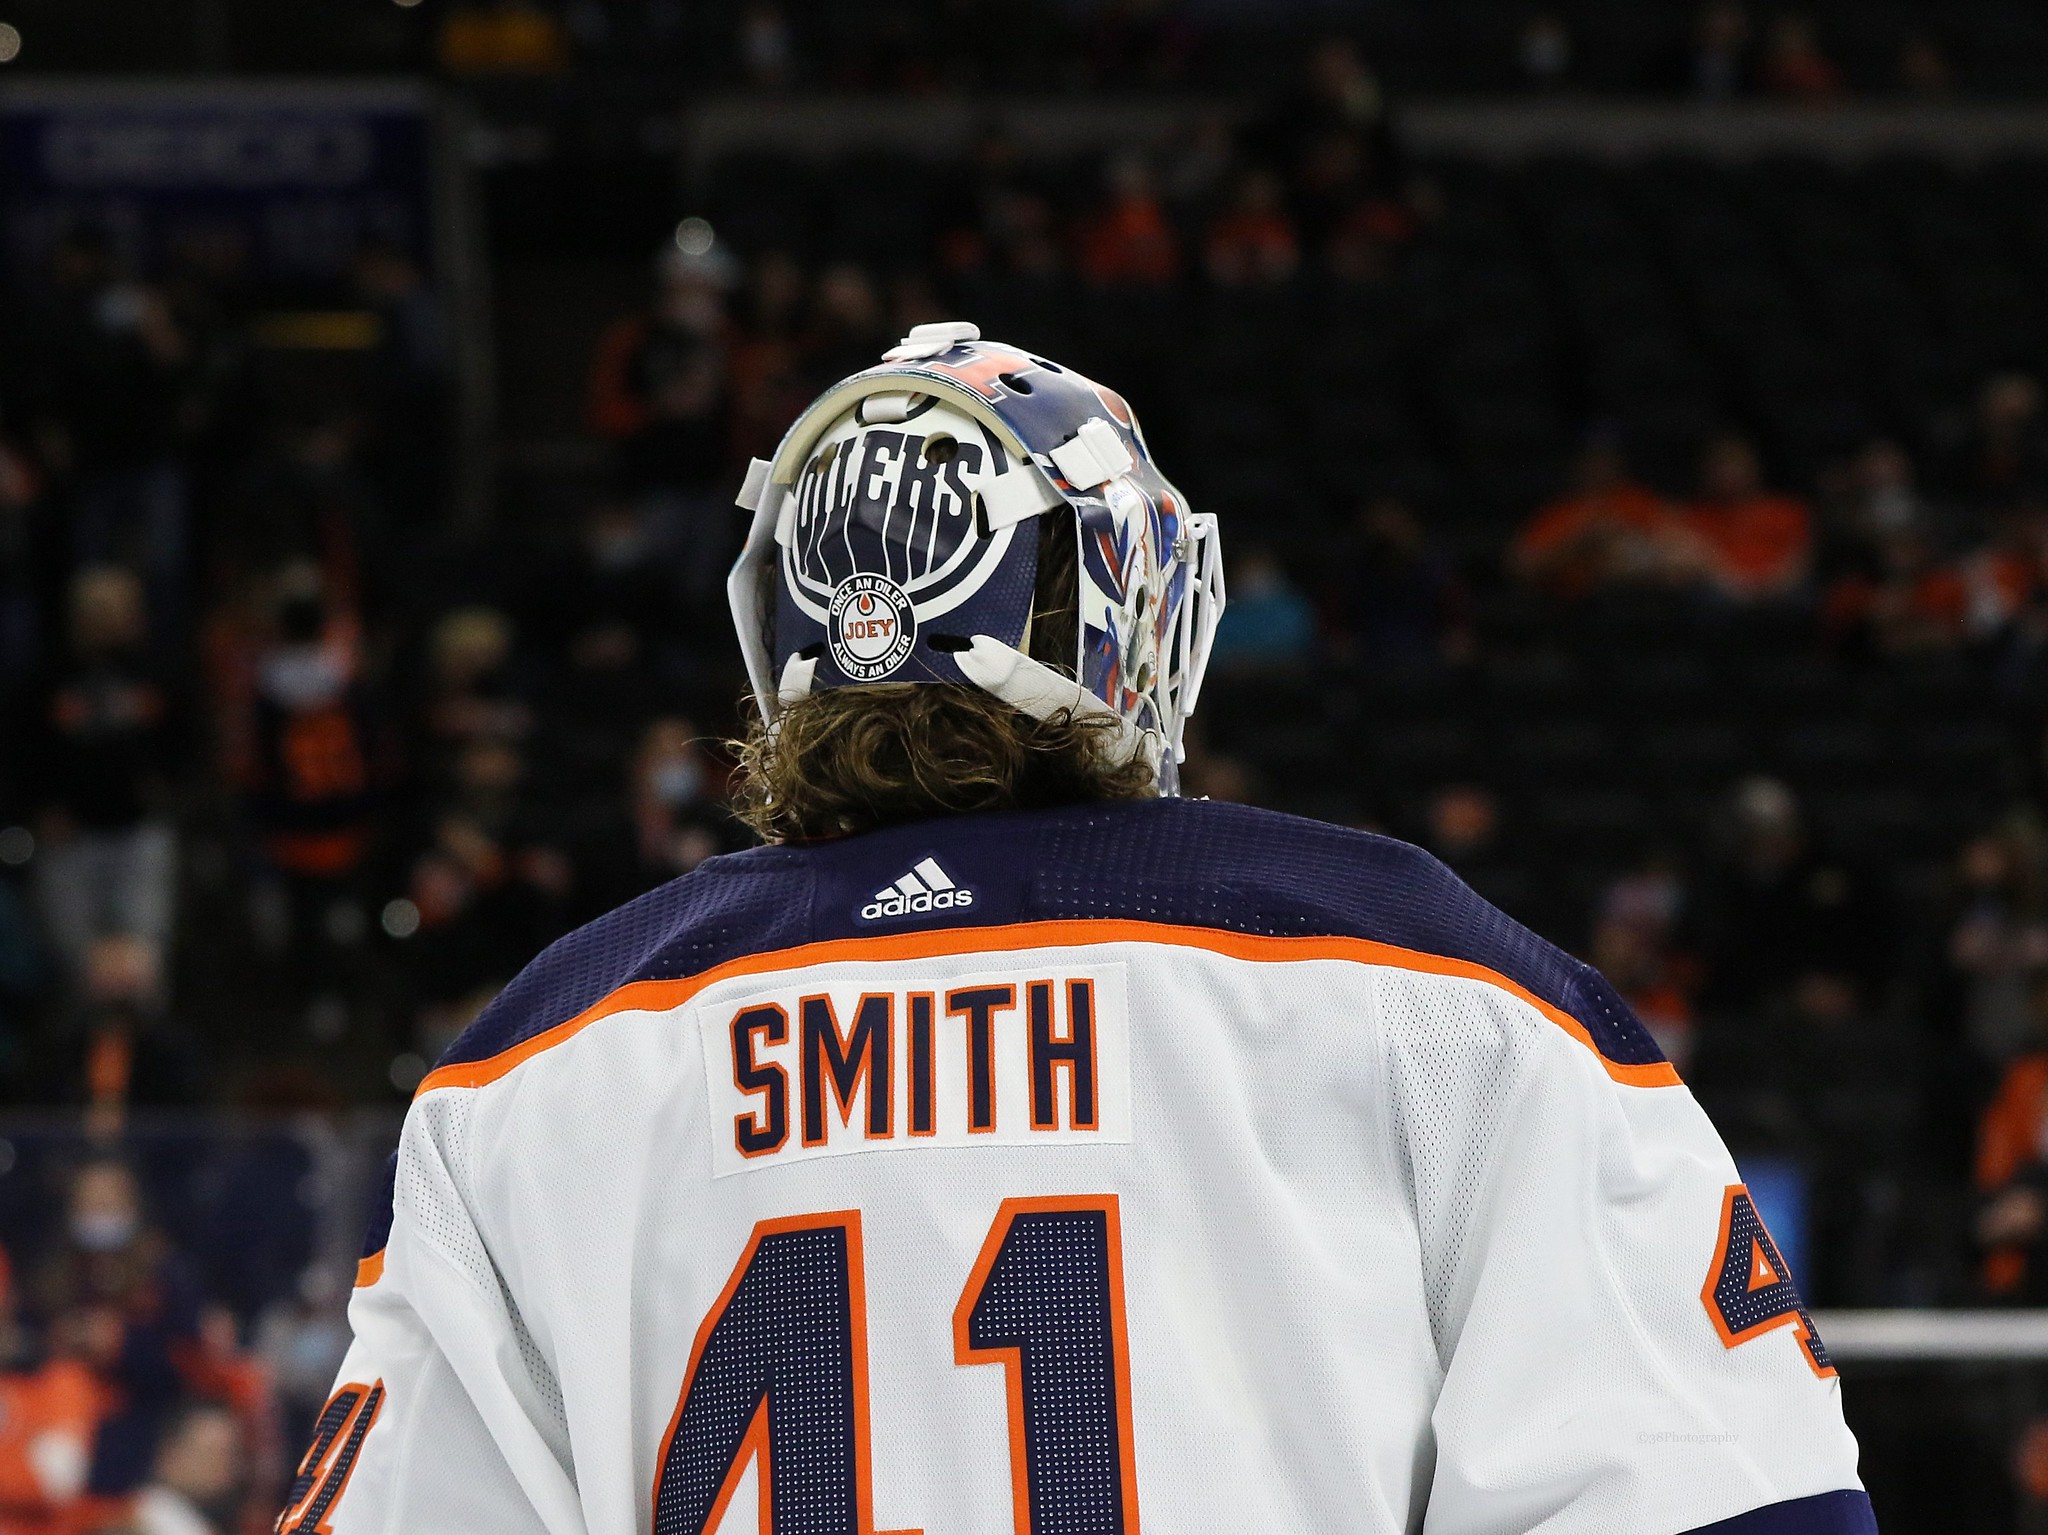 Mike Smith #41 - 2021-22 Edmonton Oilers Game-Worn White Set #3 Jersey (One  Of Two Jerseys Worn Throughout SetWorn For Regular Season & Play-offs  Round #1 vs LA, Round #2 vs Calgary) - NHL Auctions